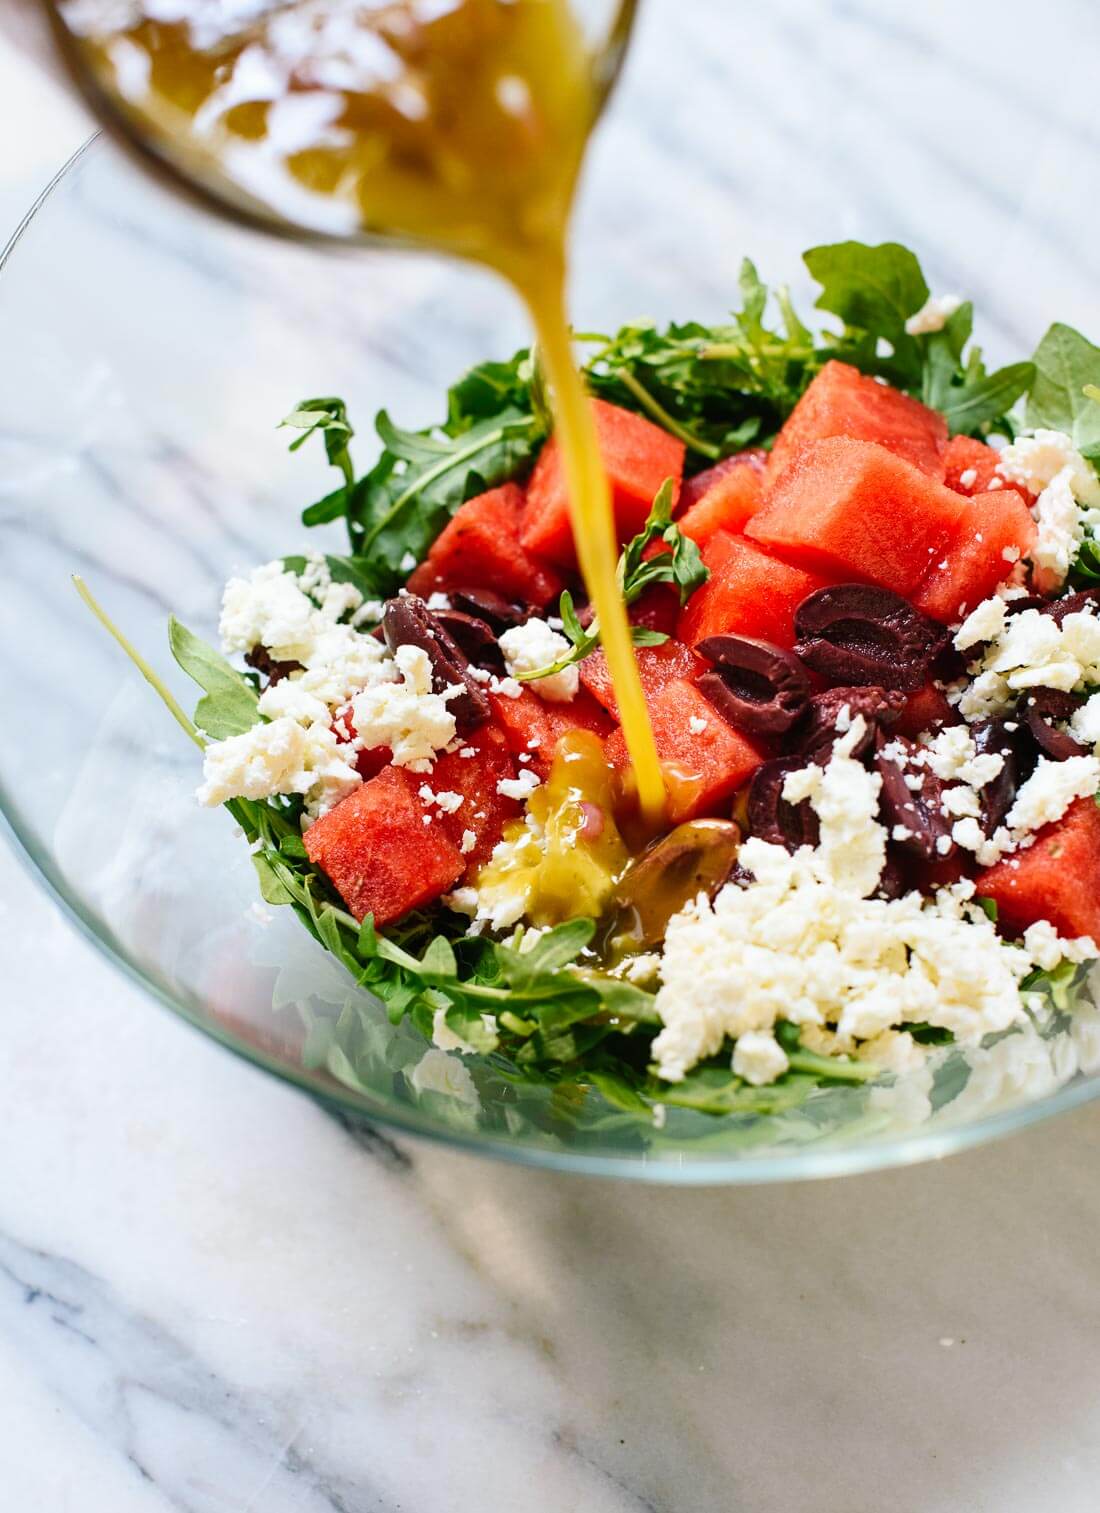 Delicious watermelon salad recipe featuring fresh arugula, feta, and olives with sherry vinaigrette - cookieandkate.com